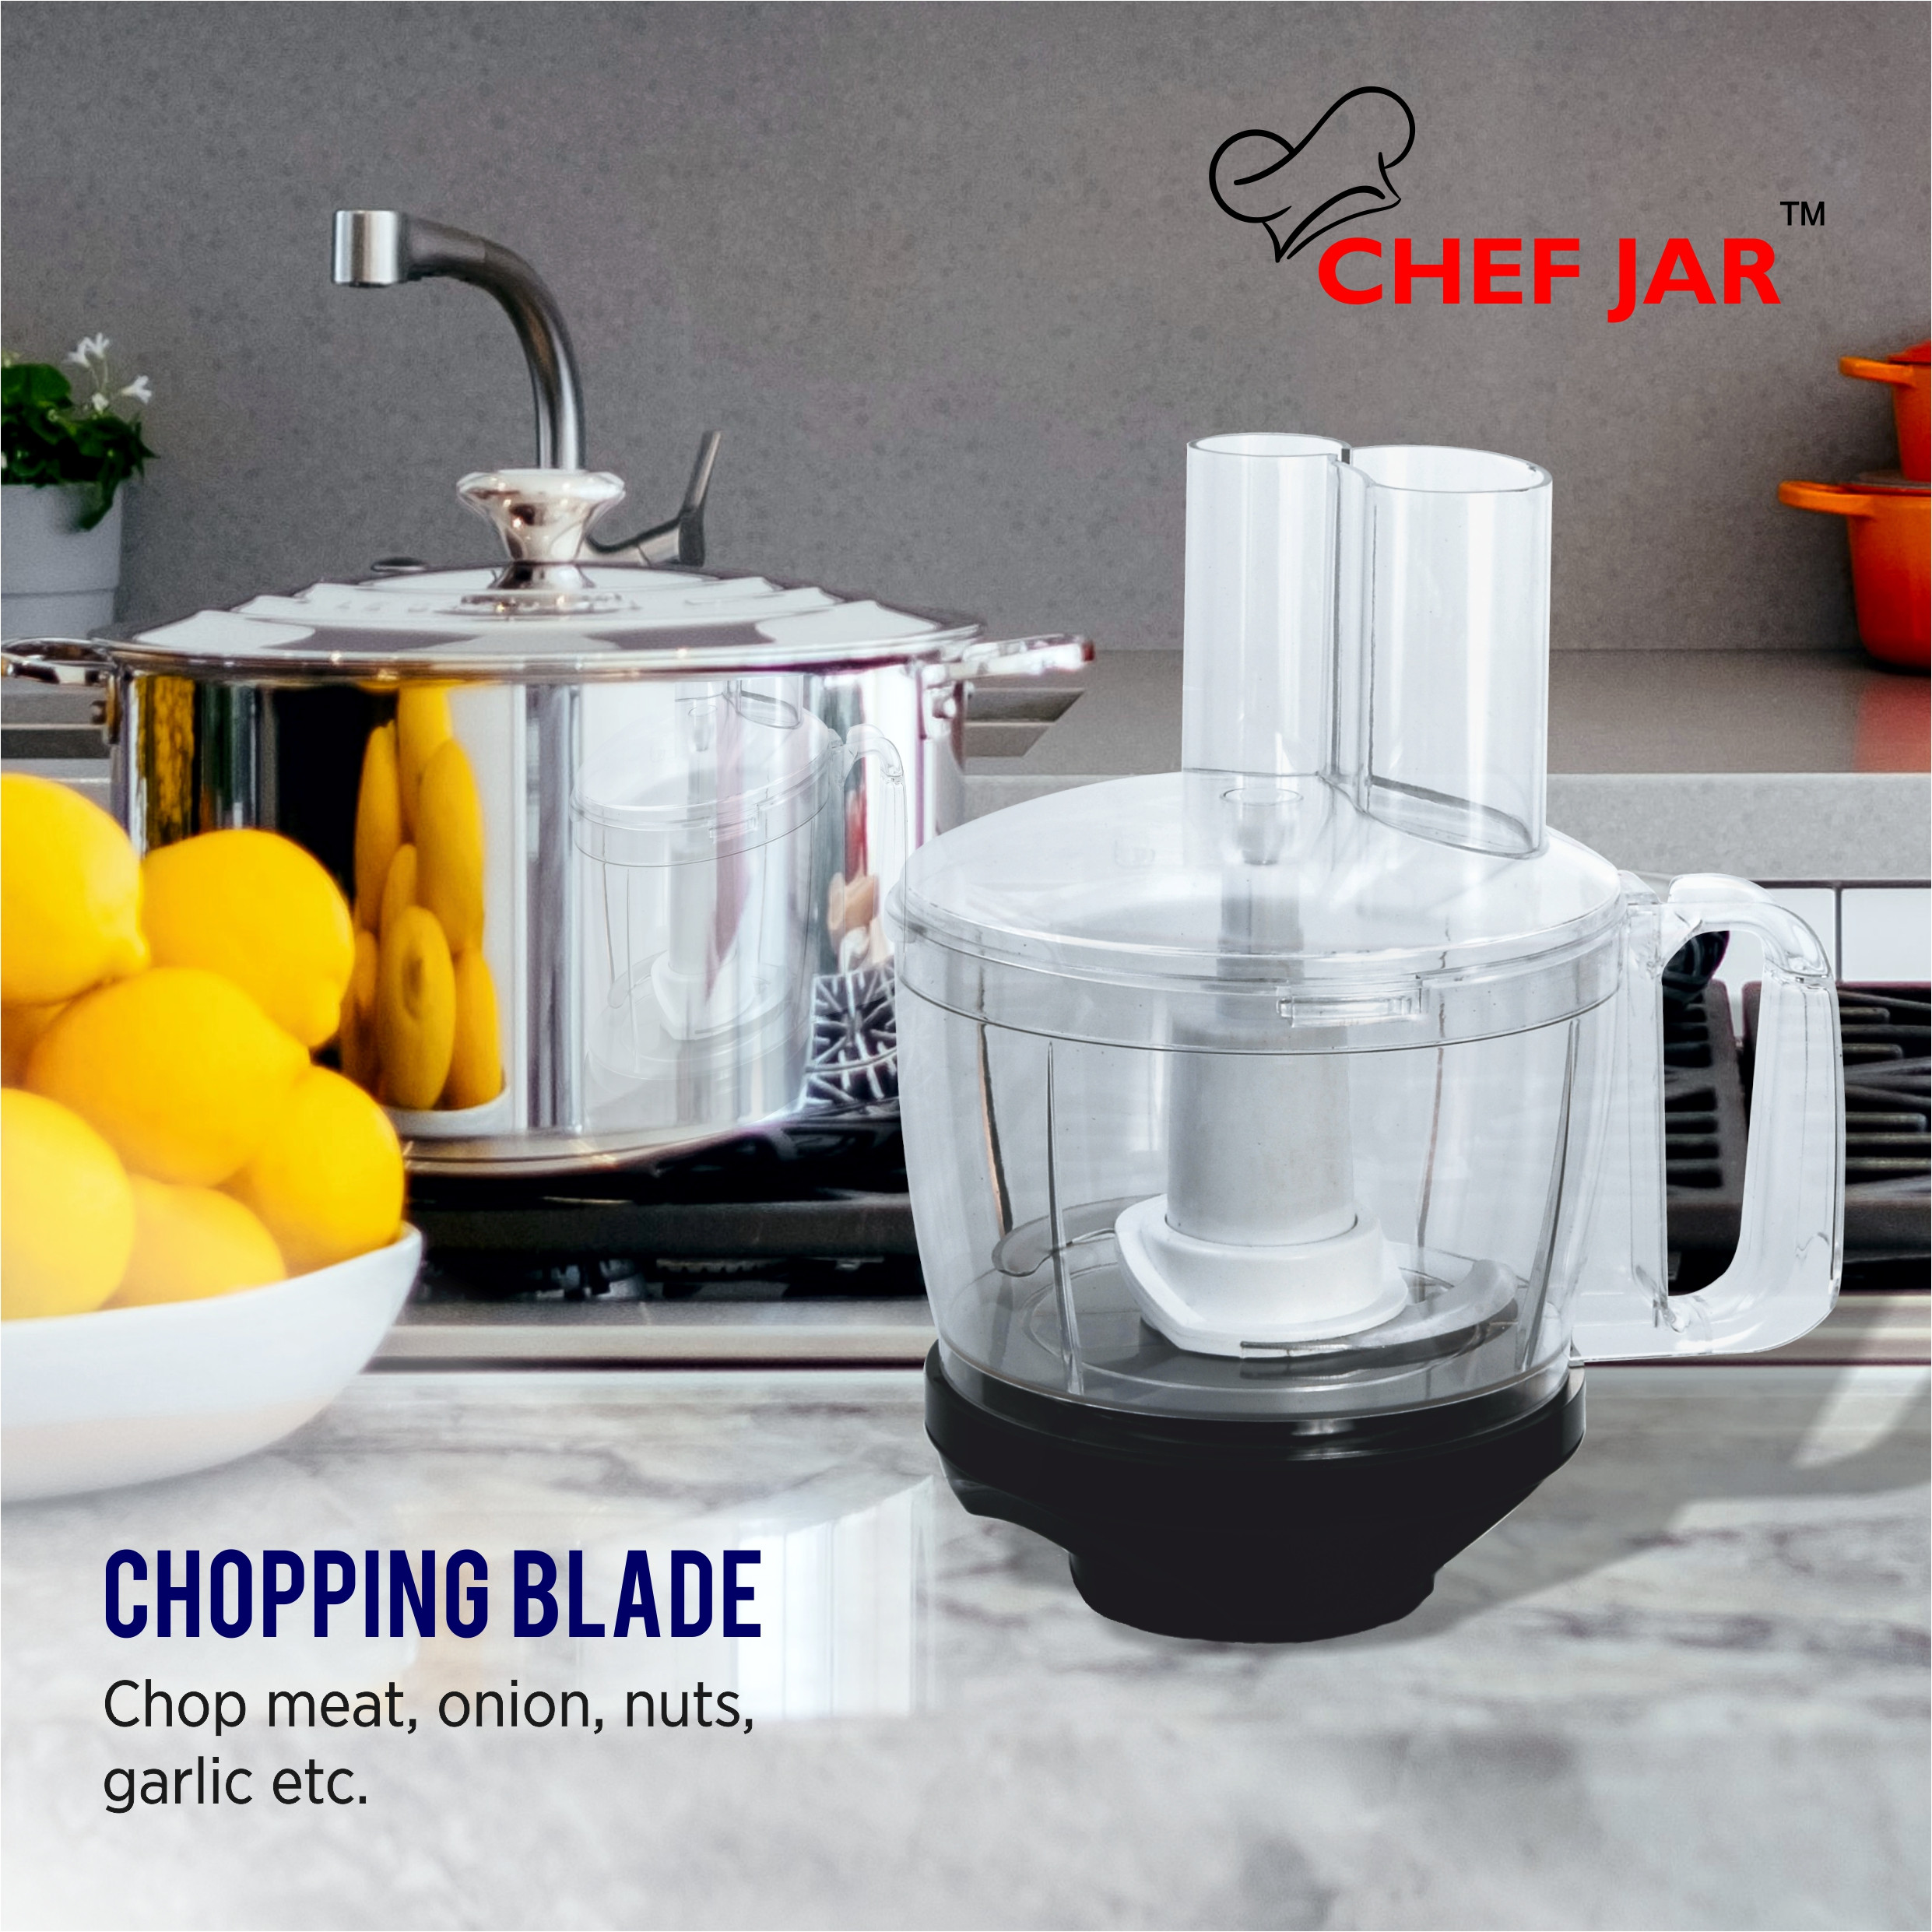 bajaj-bravo-plus-500w-indian-mixer-grinder-with-special-chef-jar-stainless-steel-jars-indian-mixer-grinder-spice-coffee-grinder-110v-for-use-in-canada-usa14